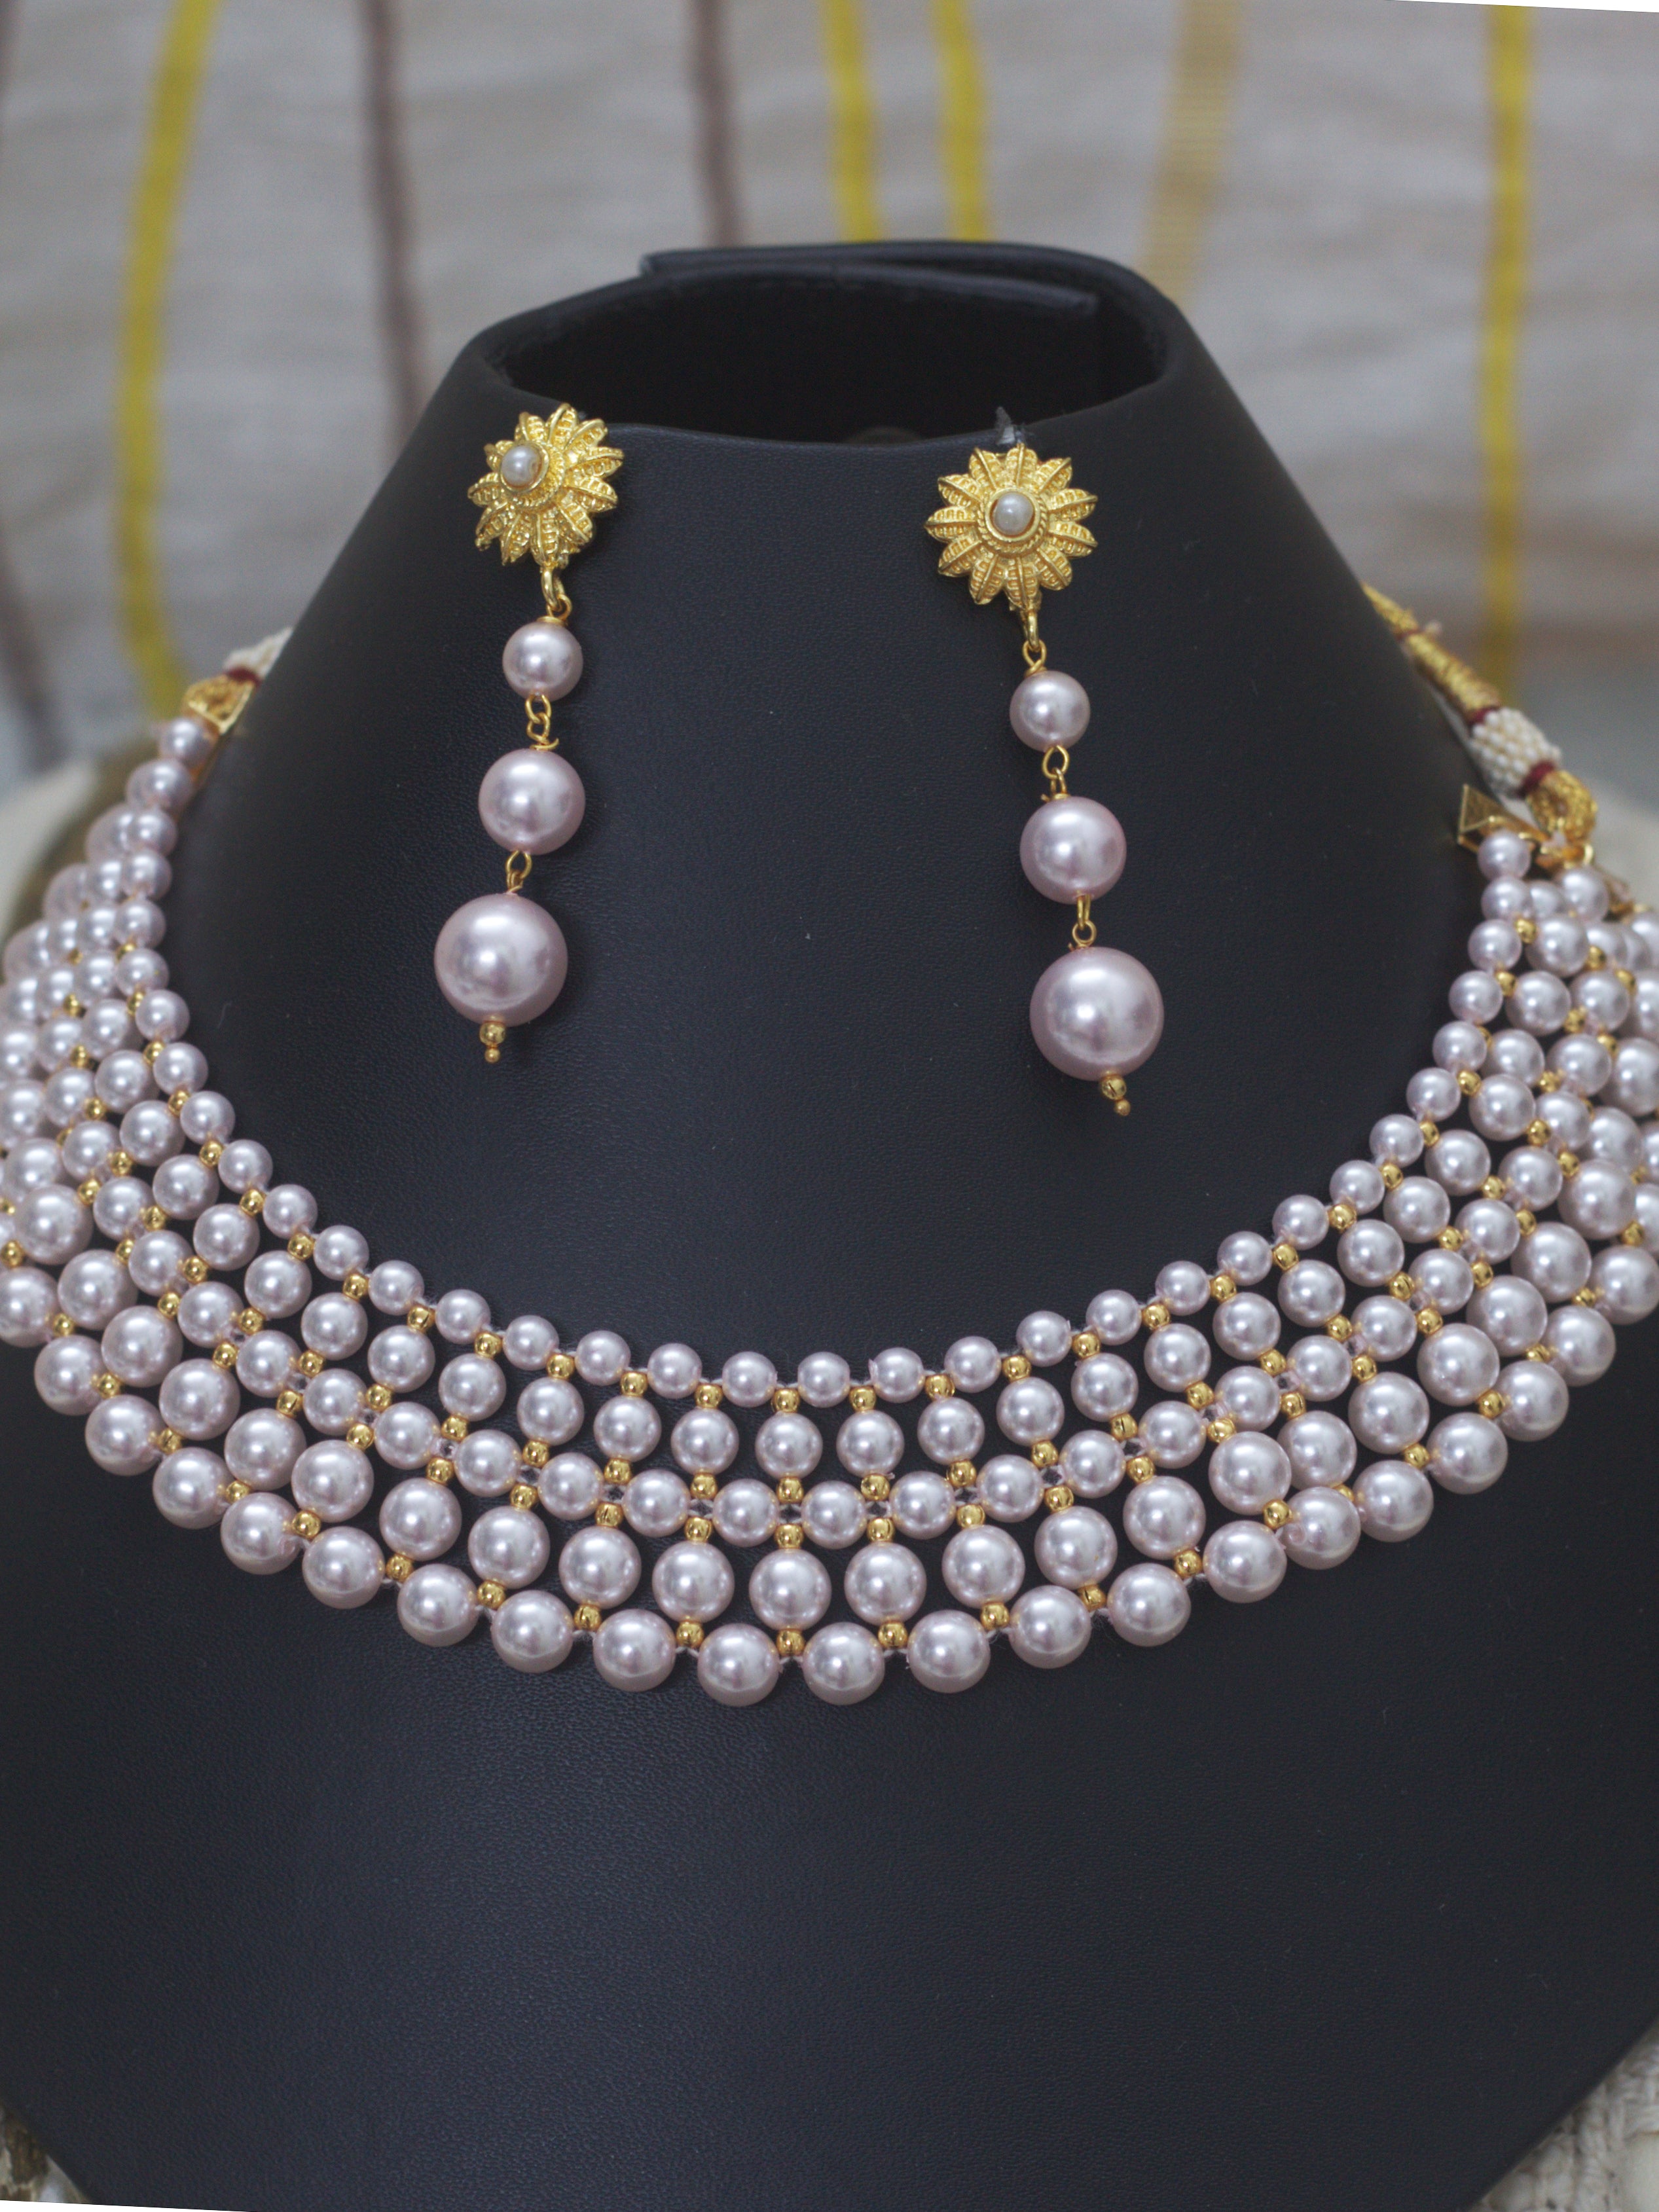 Buy Floating White Pearls Necklace, Solid Gold K14, Wedding Necklace,  Station Pearl Necklace, Bridal Jewelry, Romantic Necklace, Bridesmaid Gift  Online in India - Etsy